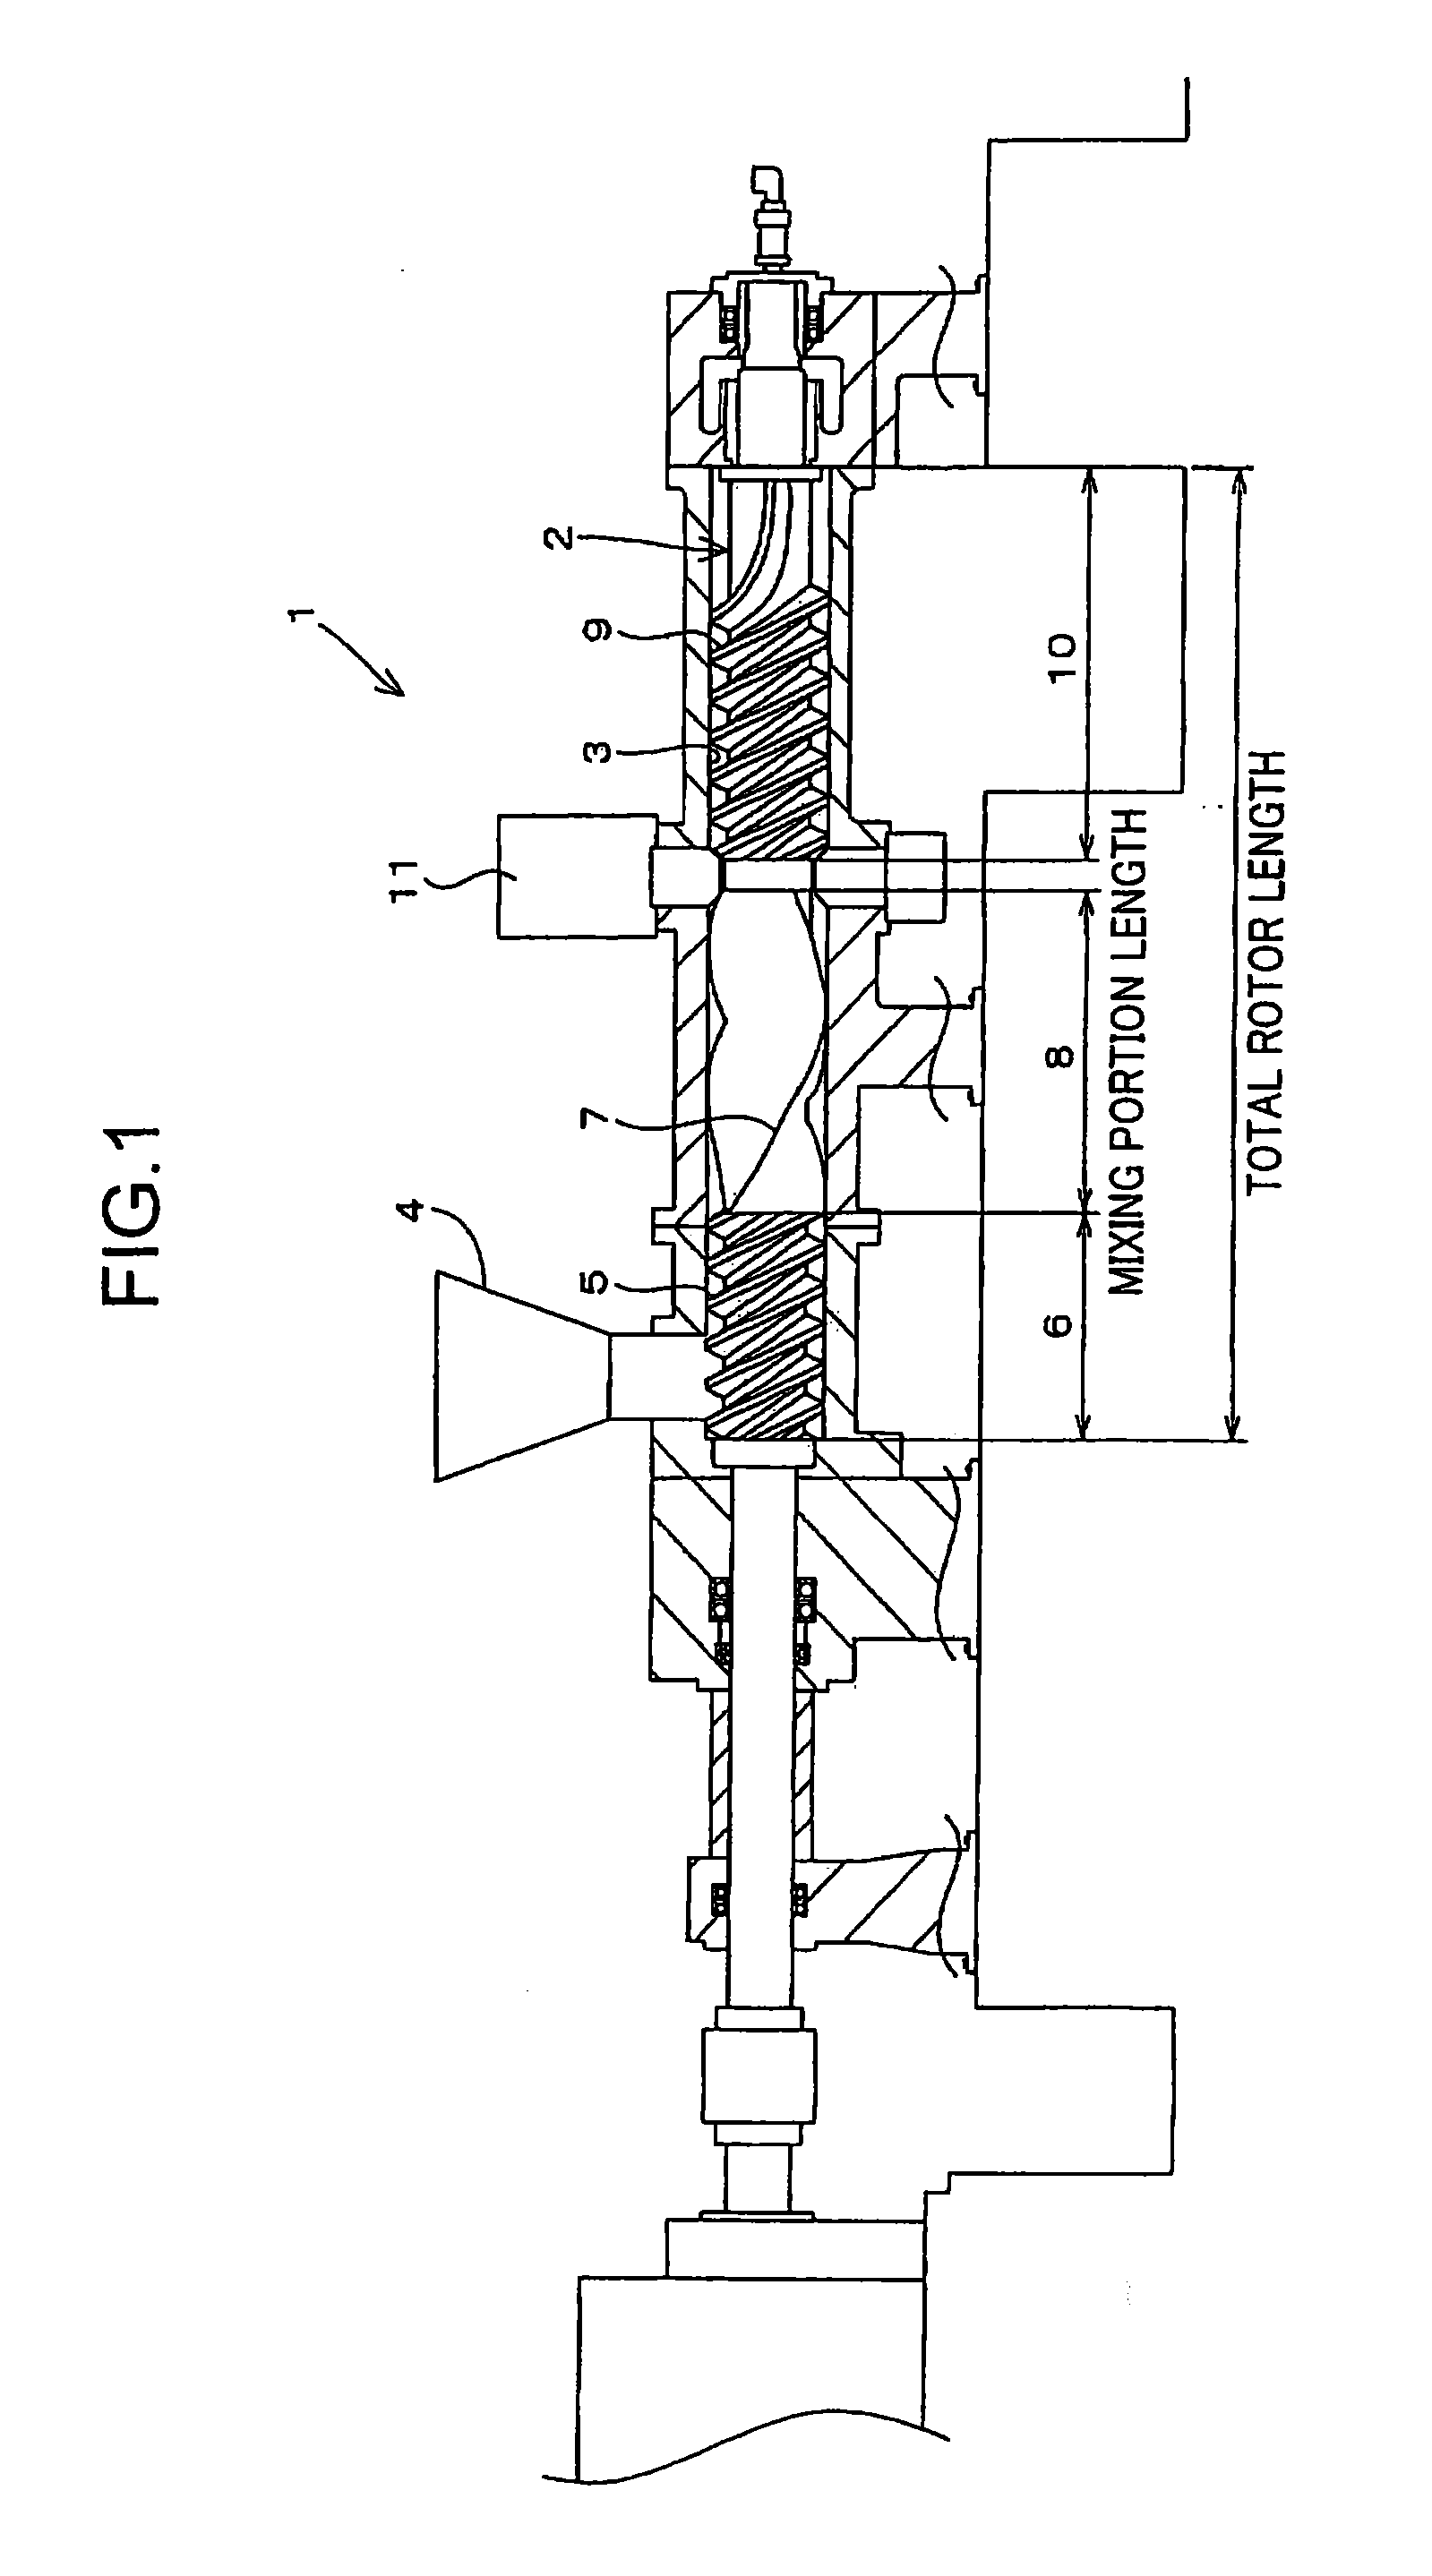 Continuous mixer and mixing method